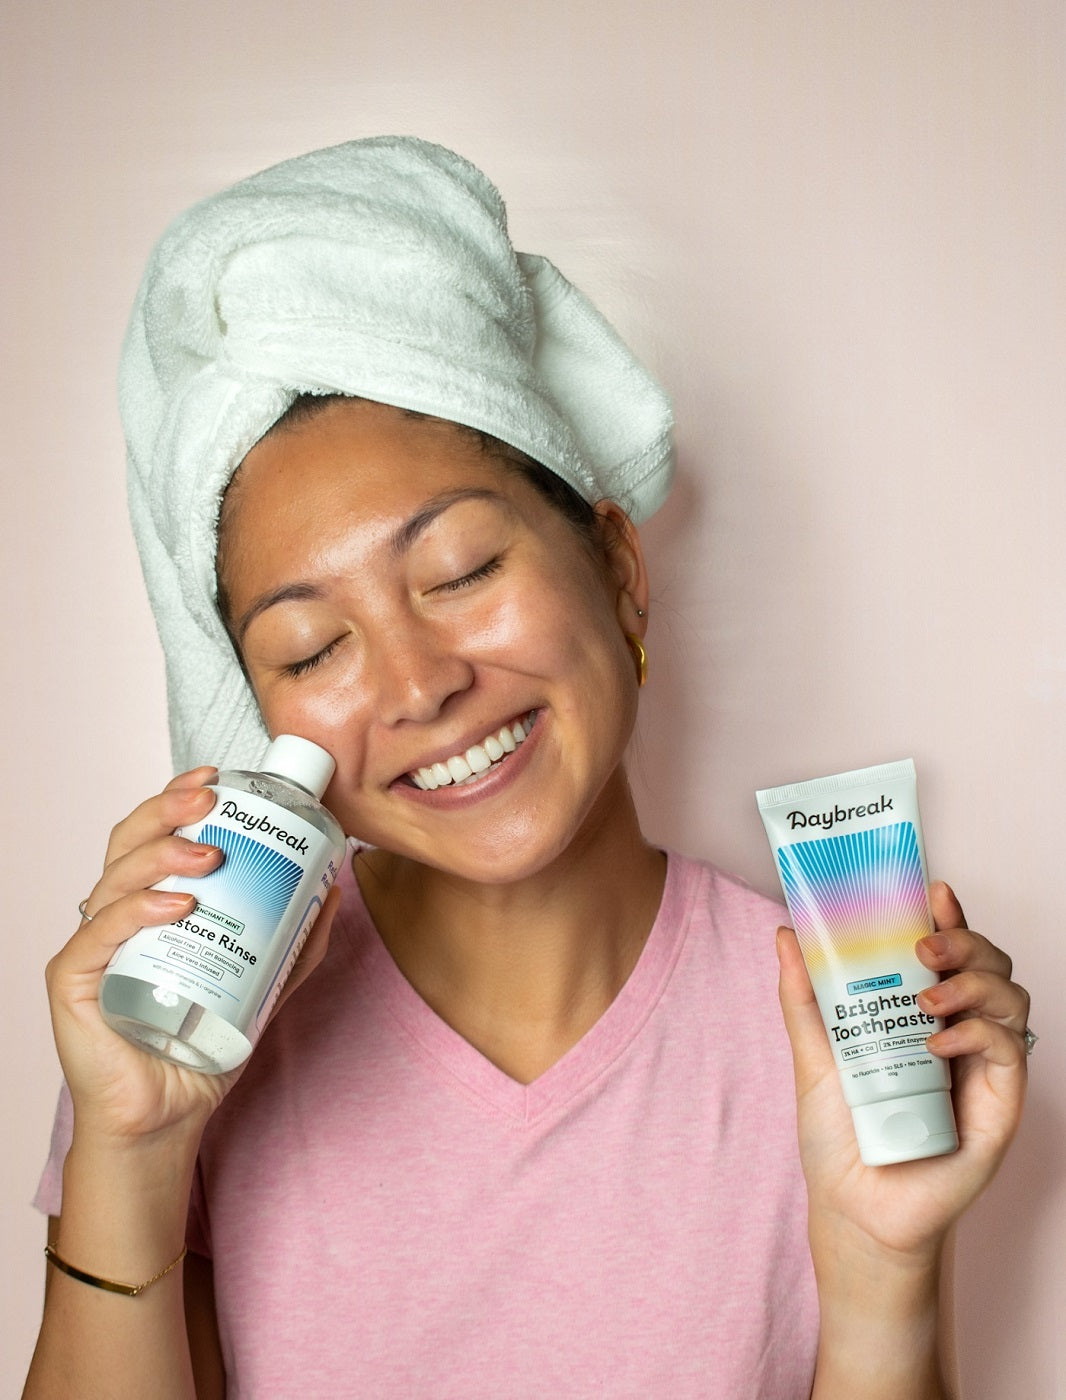 A woman with a healthy smile holds the Daybreak toothpaste and mouthwash lovingly